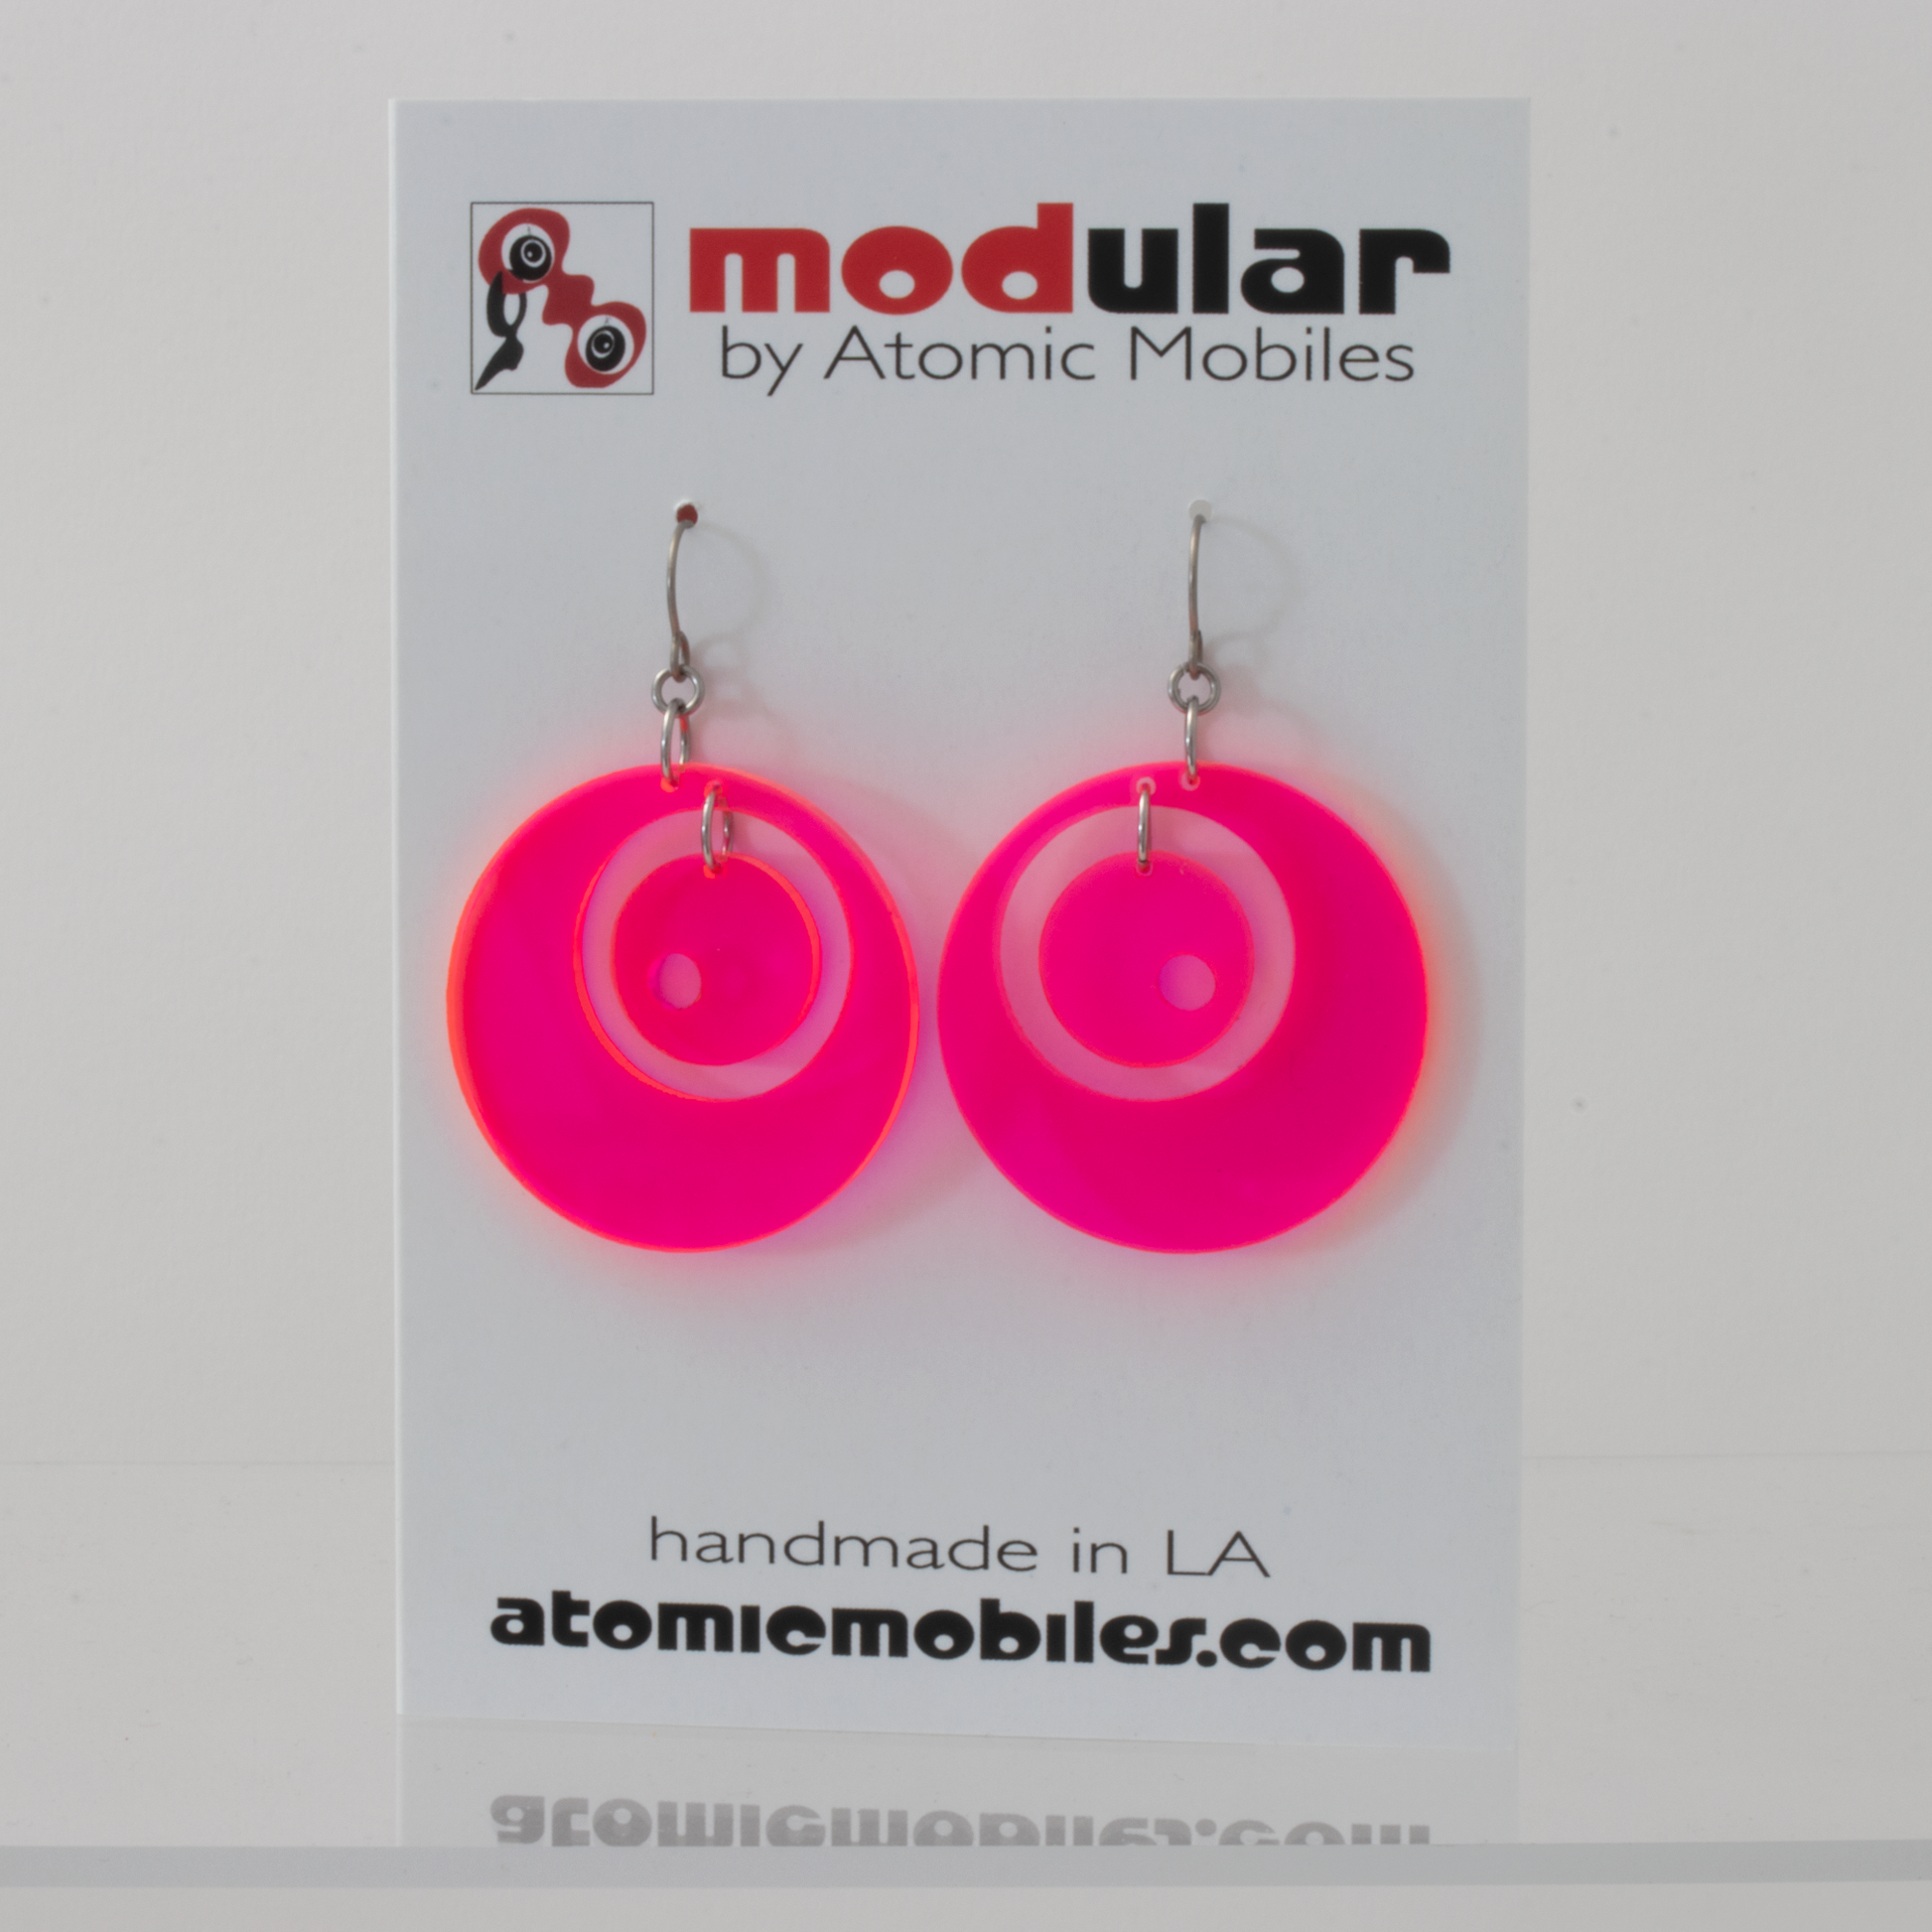 Groovy 1960s Mid Century Modern Style Earrings in Neon Fluorescent Hot Pink plexiglass acrylic by AtomicMobiles.com